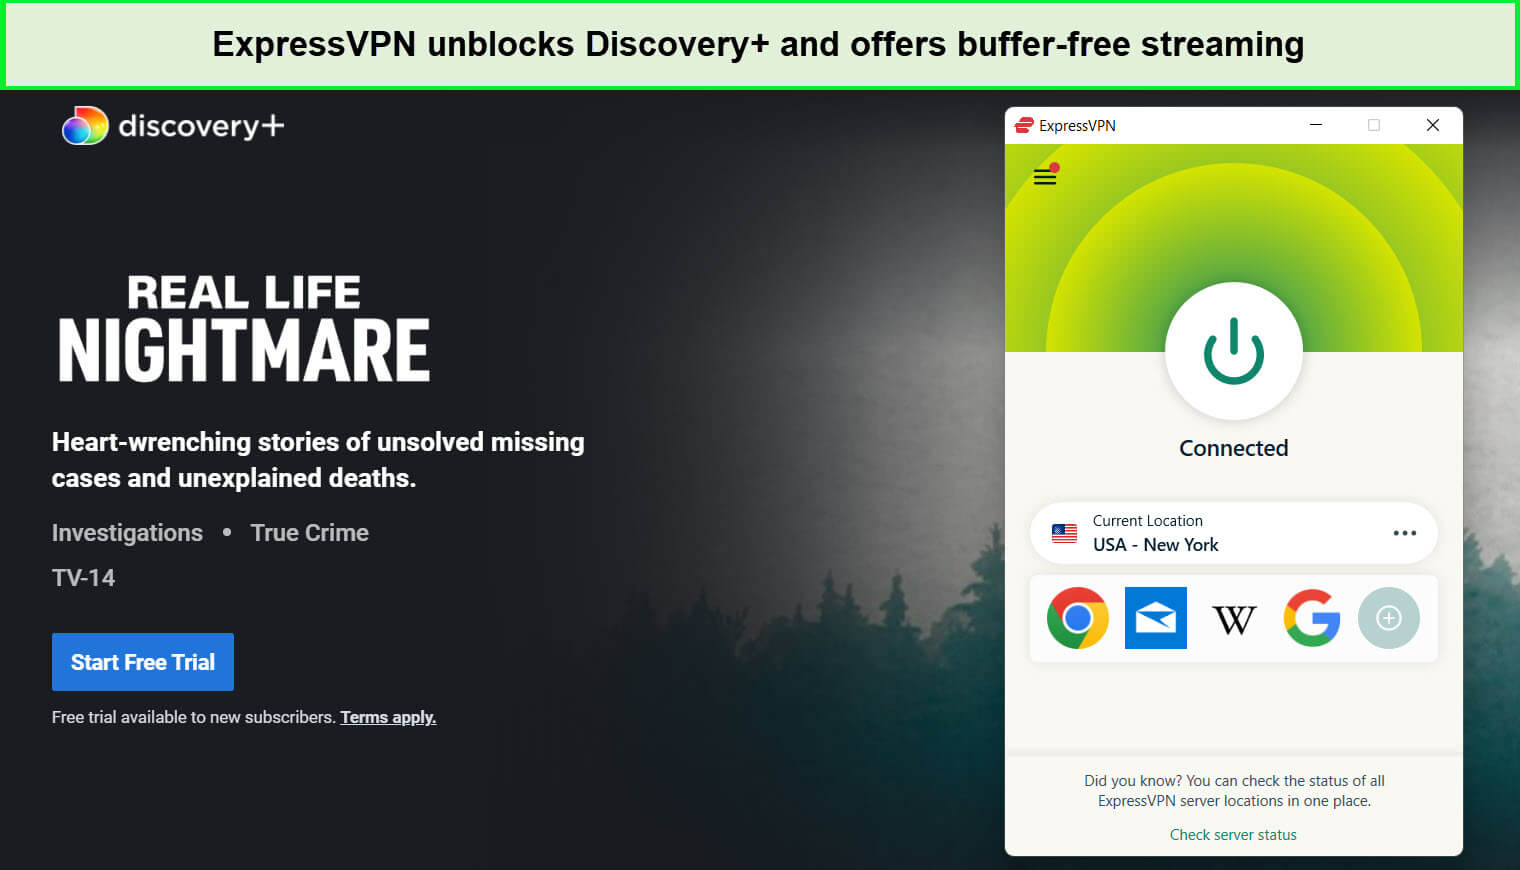 expressvpn-unblocks-real-life-nightmare-on-discovery-plus-in-au